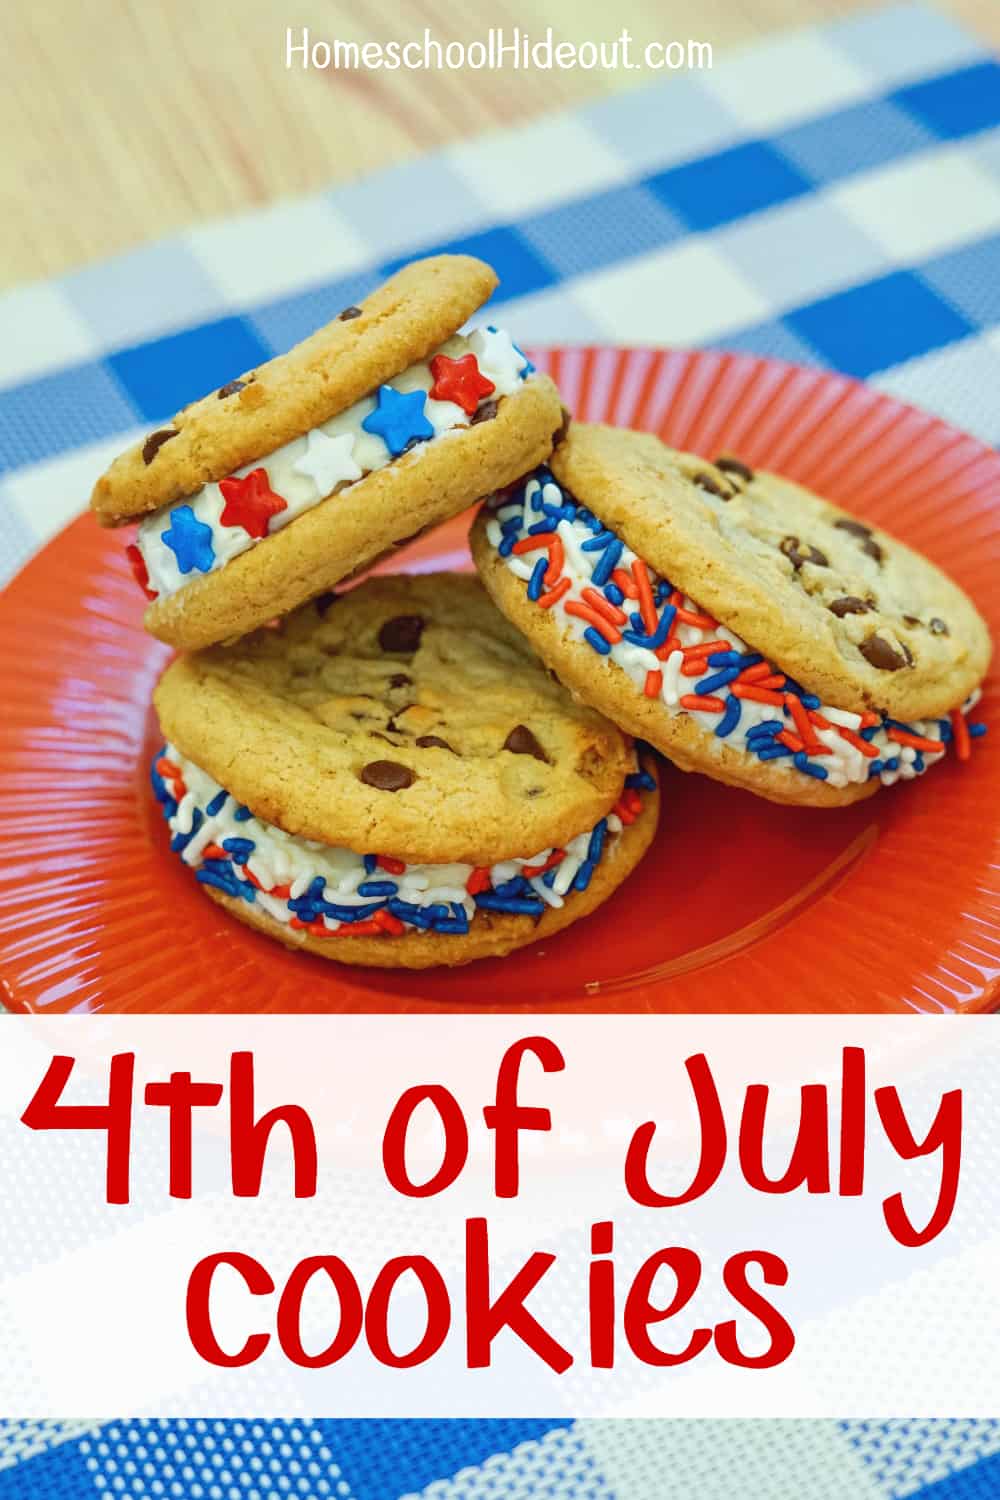 These yummy red, white and blue cookie sandwiches are the perfect treat for hot summer days, barbecues and birthday parties!